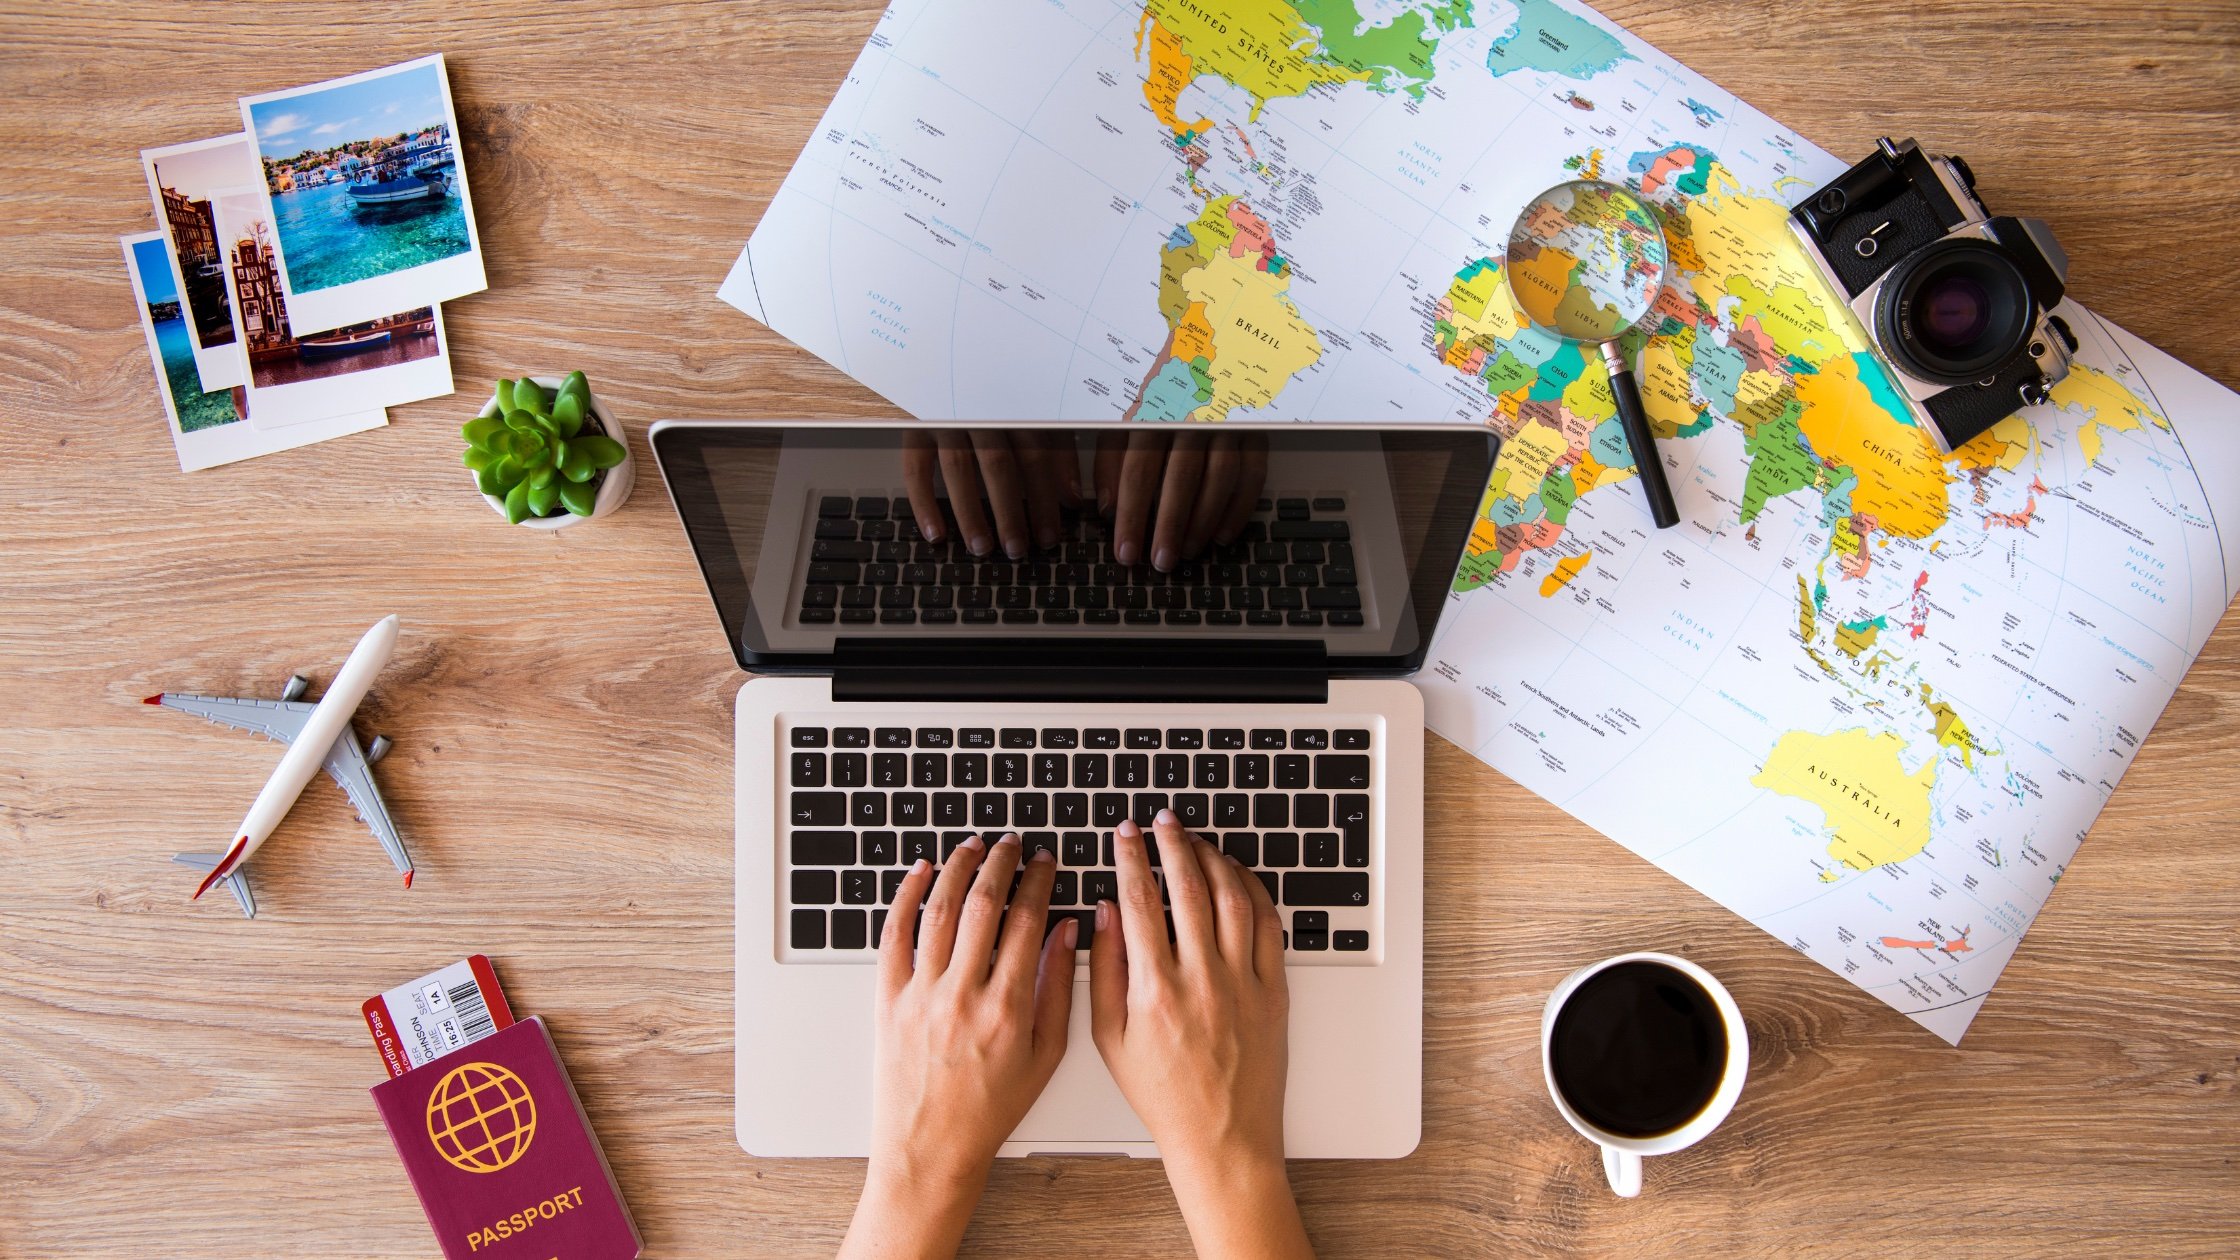 Travel websites: A one-stop shop for planning your next trip